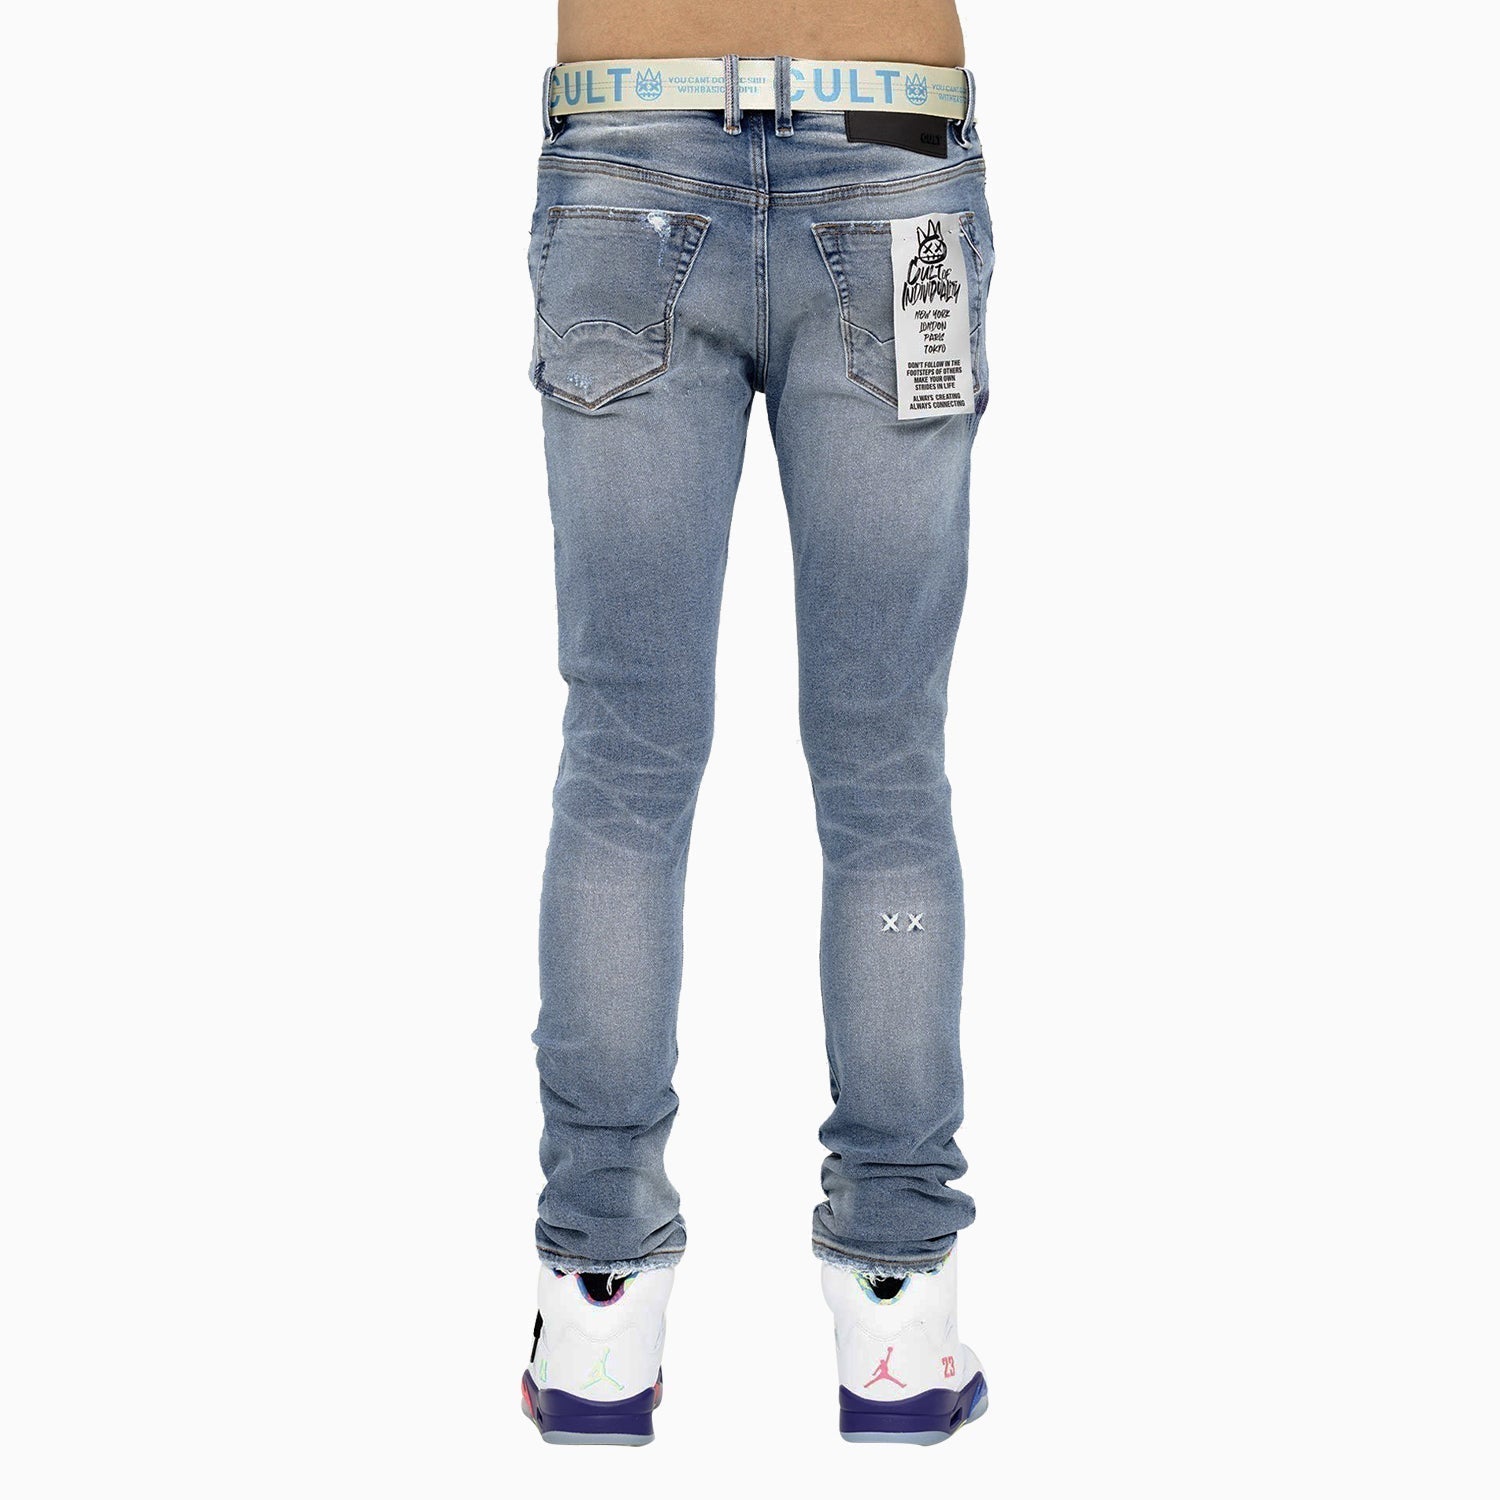 cult-of-individuality-mens-punk-super-skinny-belted-in-taylor-denim-jeans-621b7-ss04l